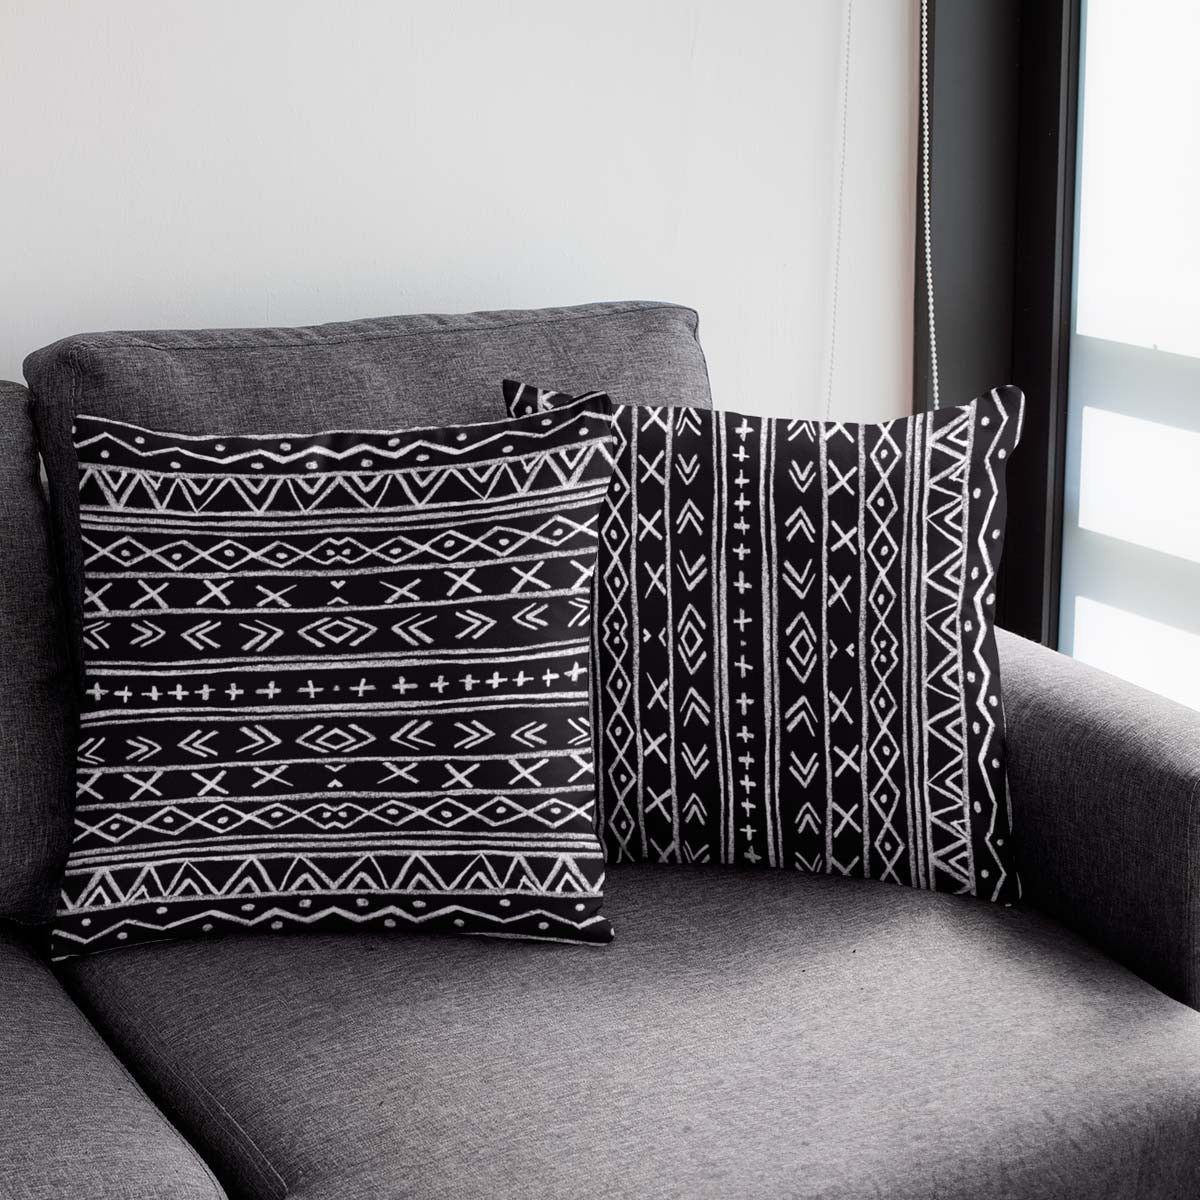 African Style Throw Pillow Cover Case in Tribal Black & White